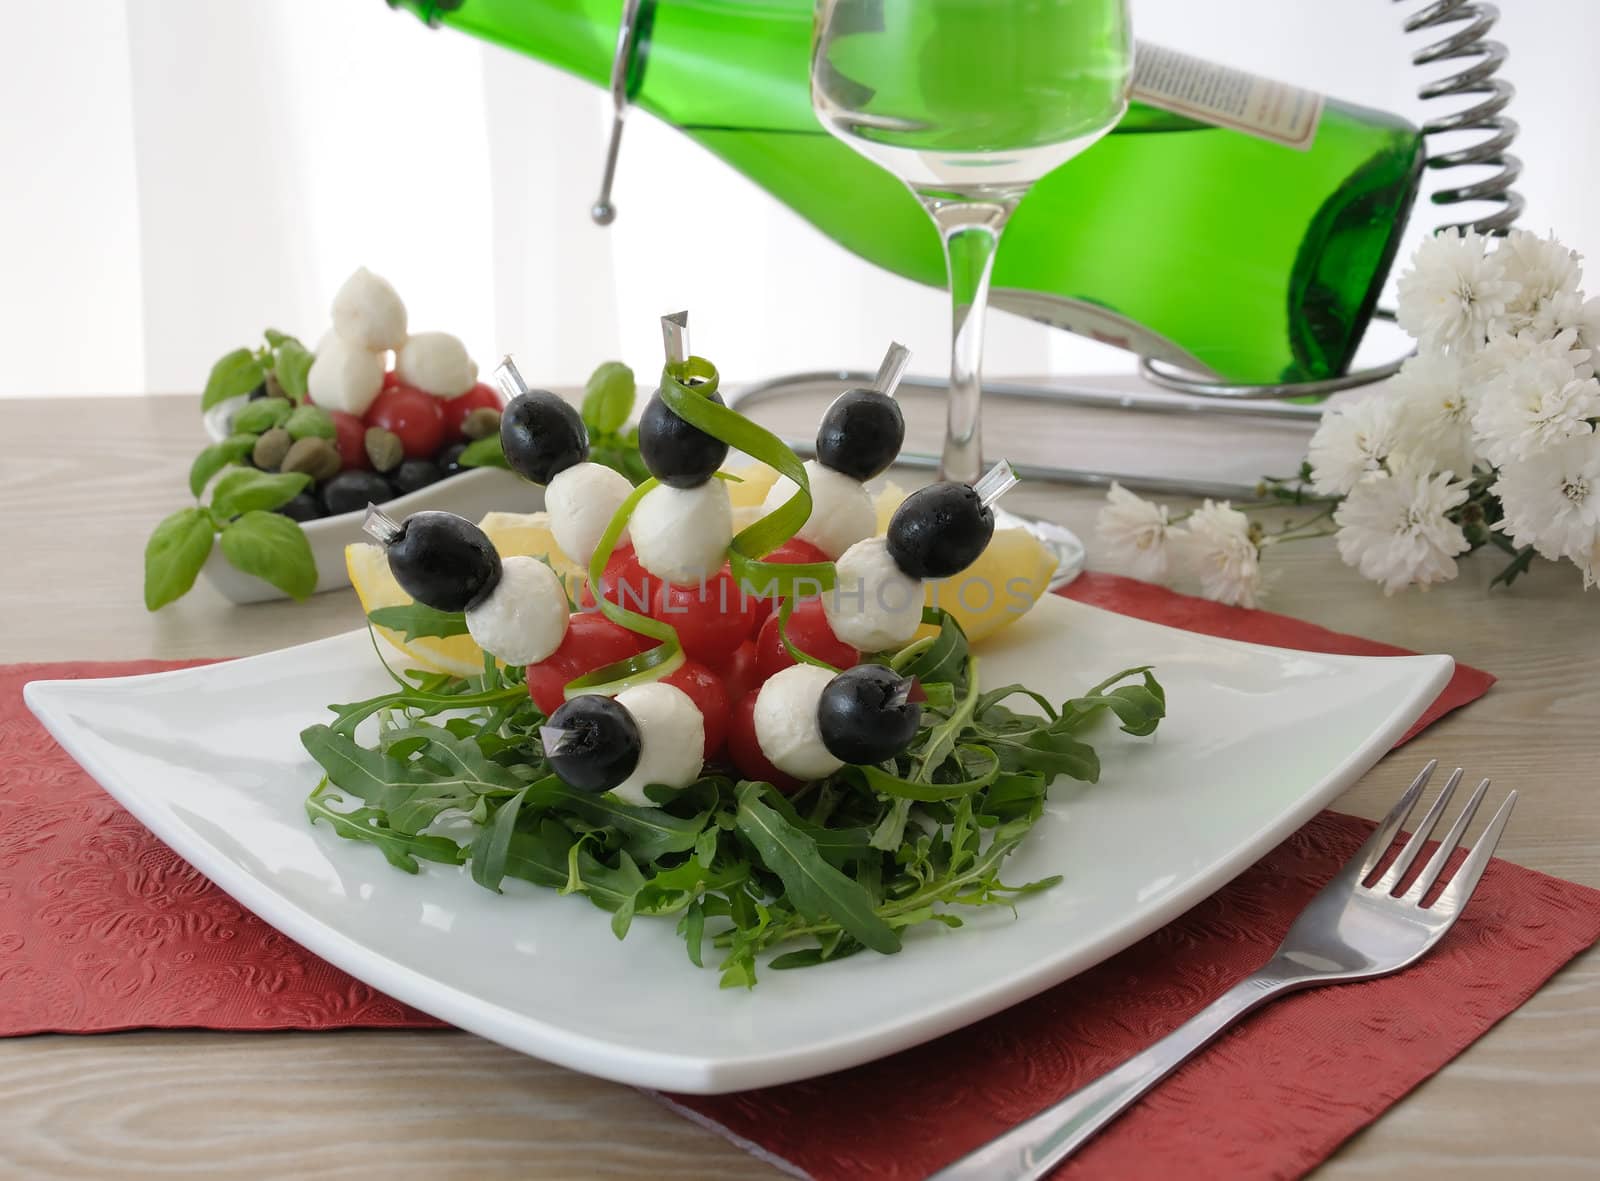 Mozzarella with cherry tomatoes and olives on a skewer with arugula and white wine